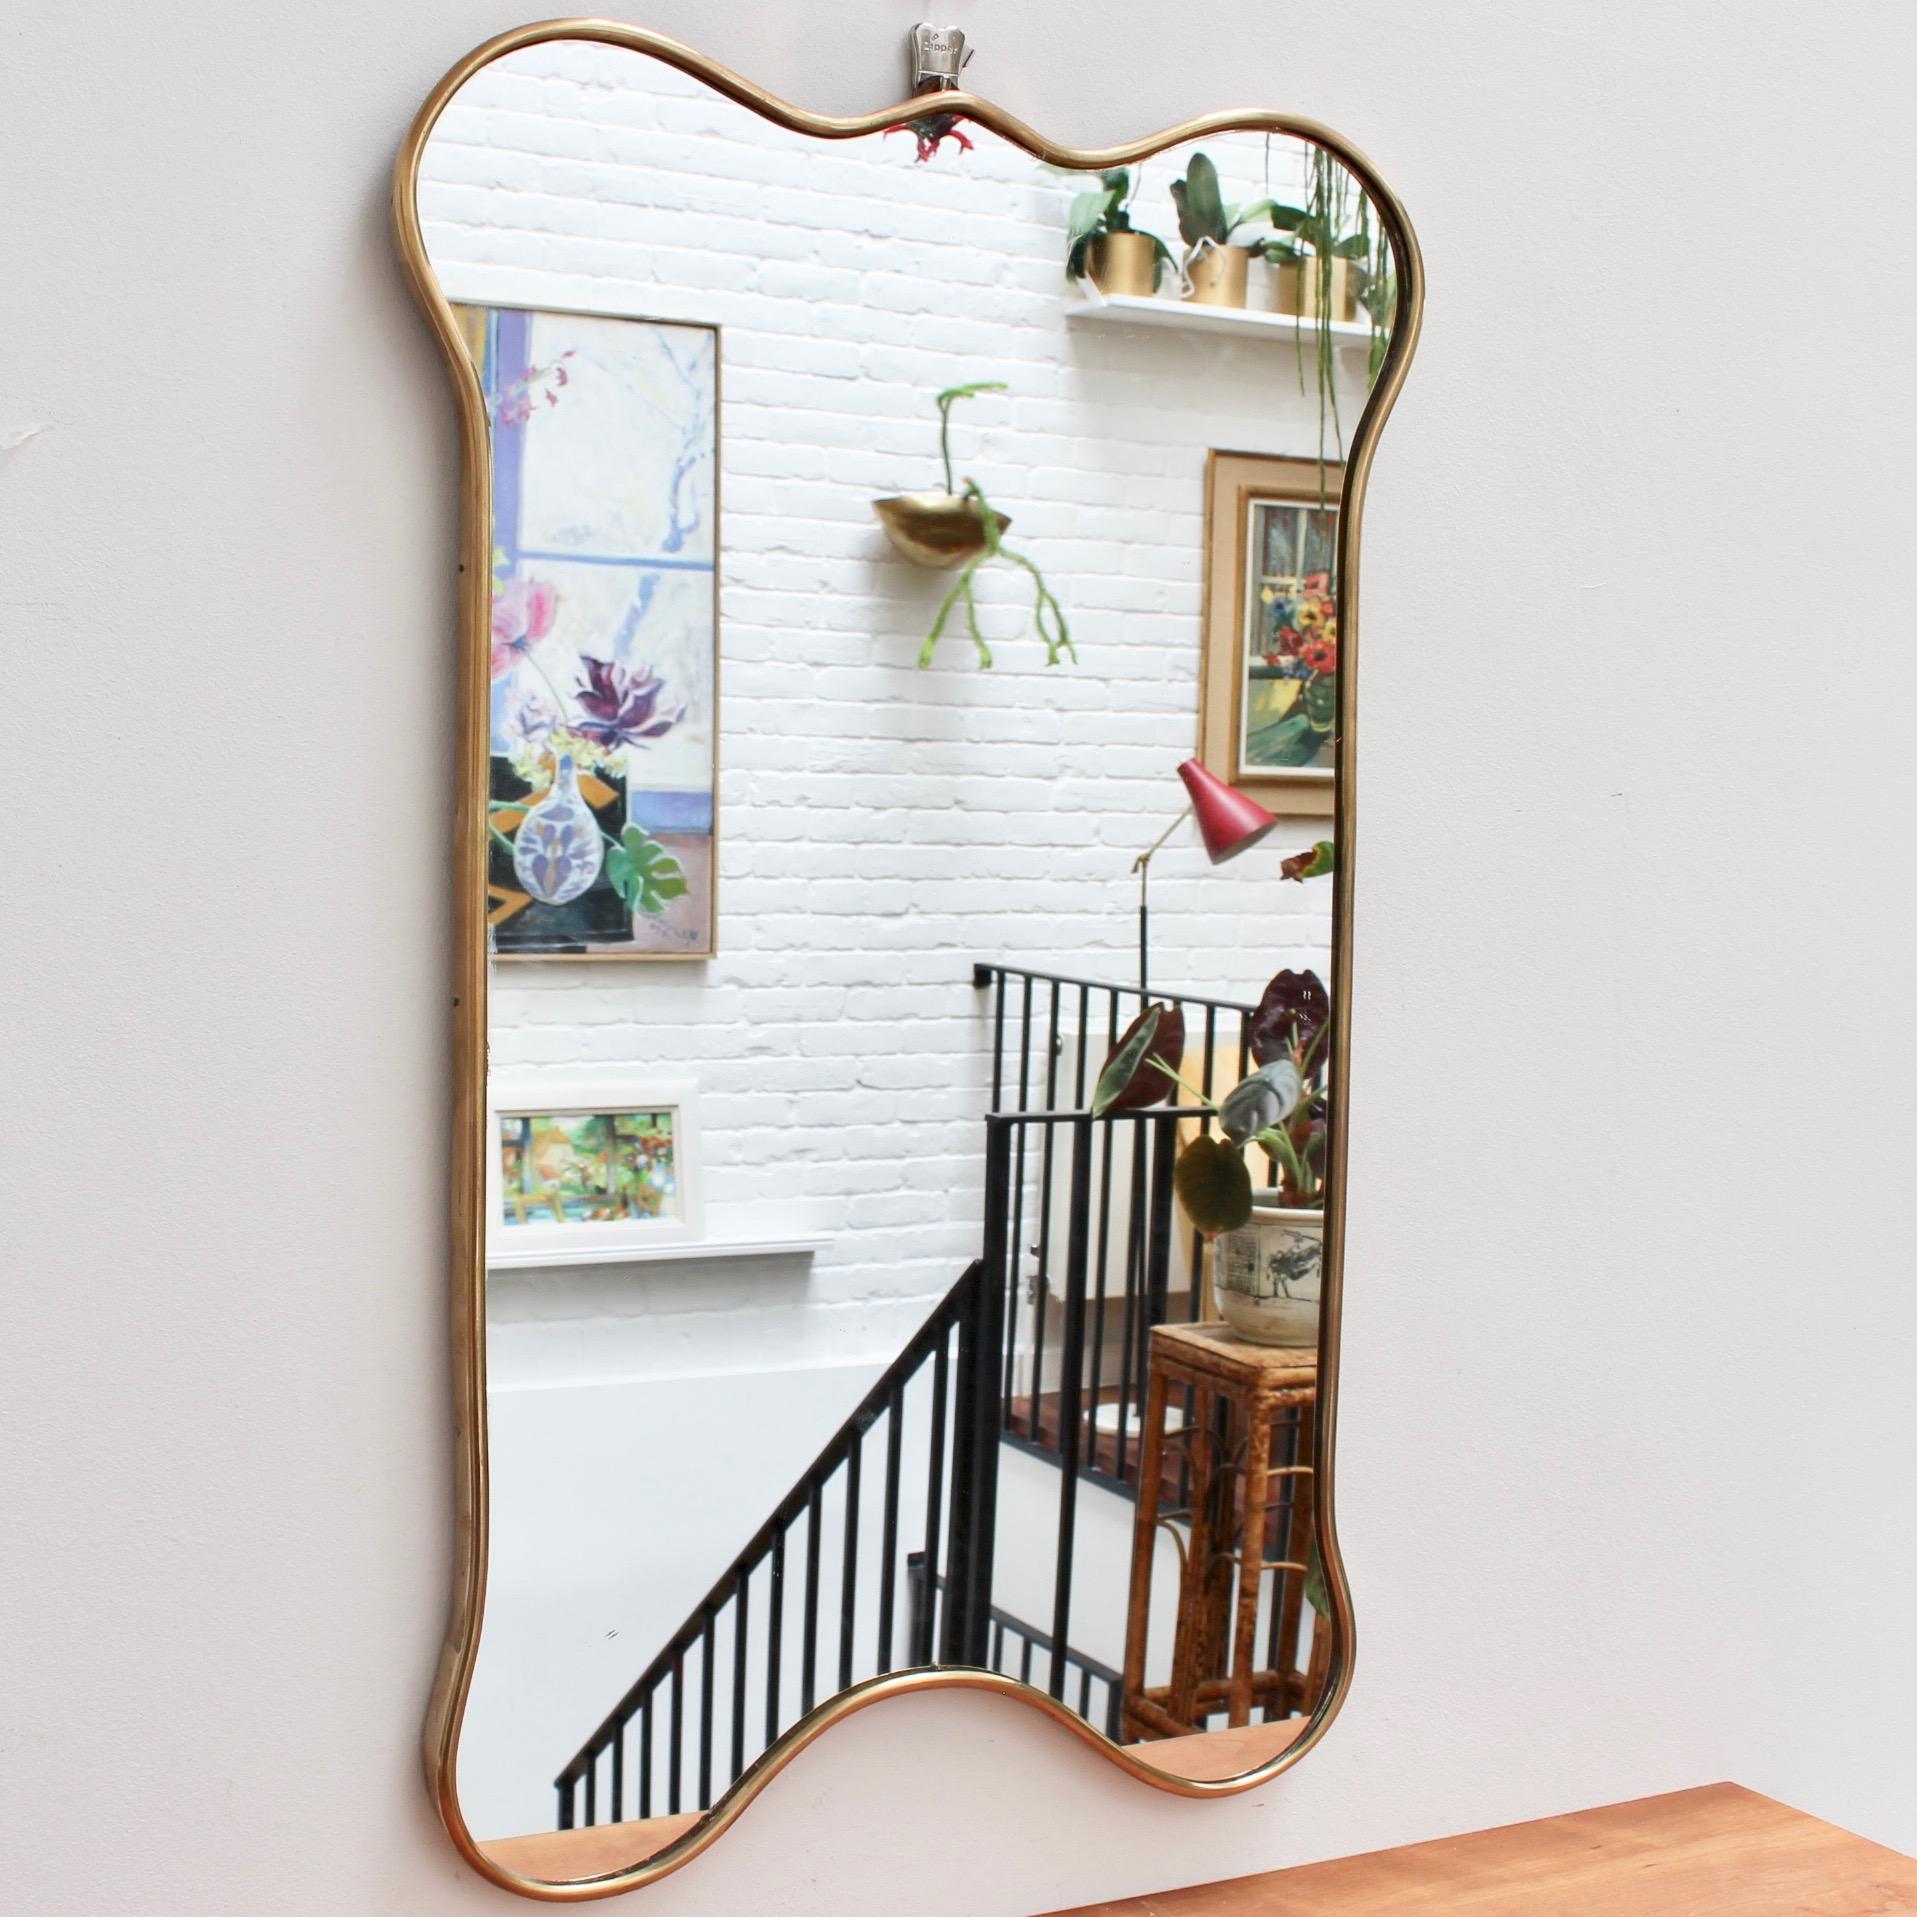 Midcentury Italian wall mirror with brass frame, (circa 1950s). This mirror has sensuous curves yet retains its solidity and imposing good looks. The vertical dog bone-shape features rounded edges on top and bottom with parallel lines in between. It